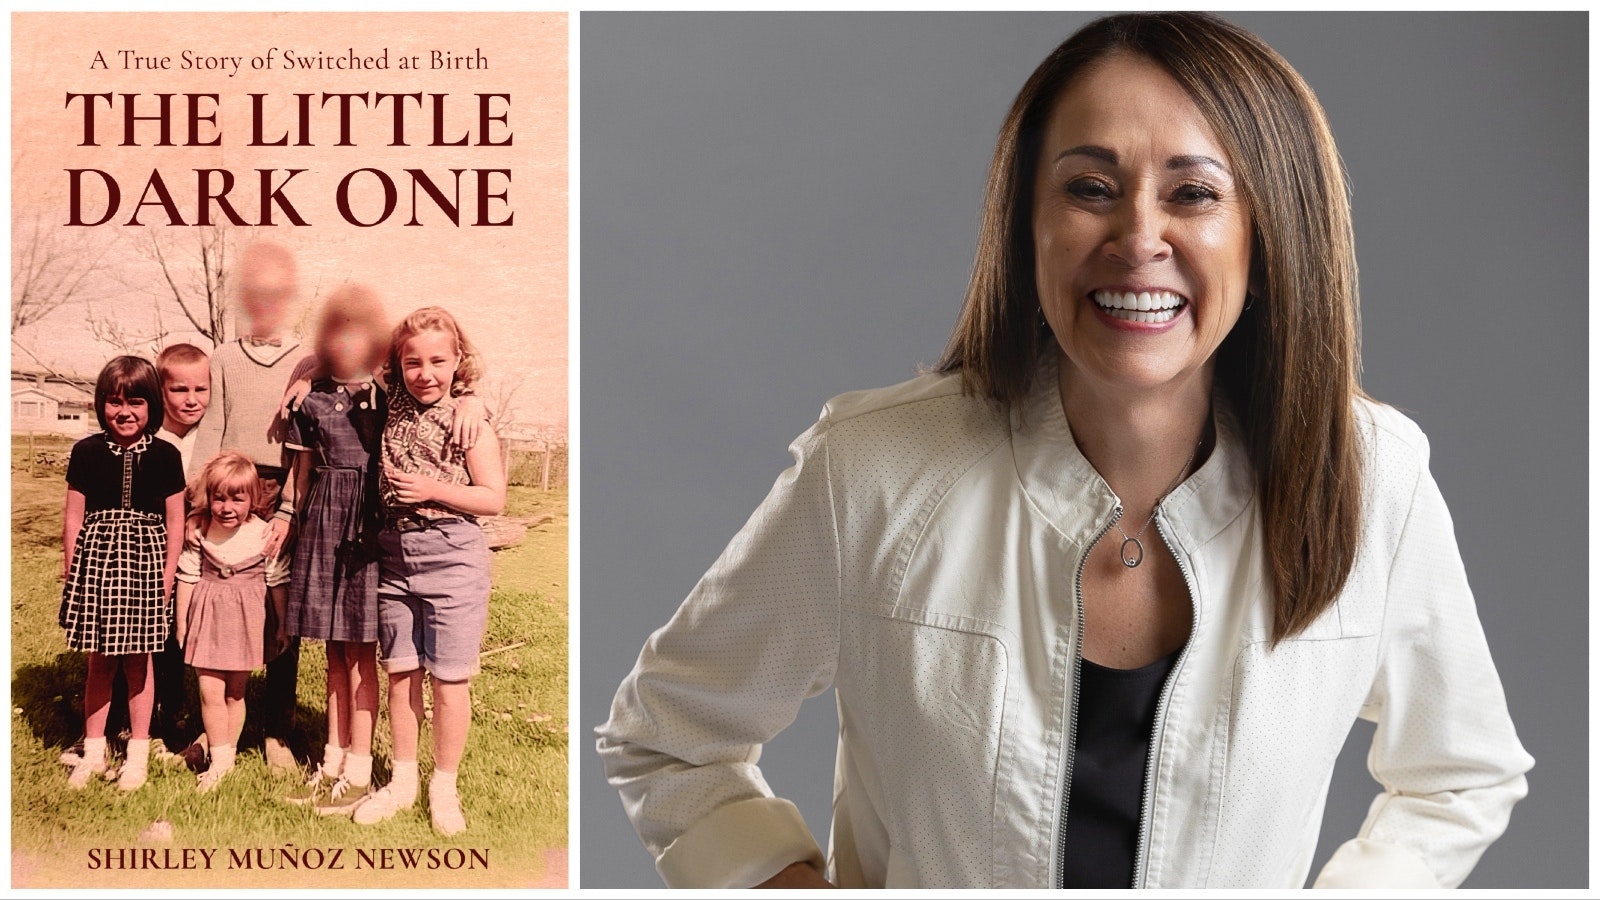 Gillette, Wyoming, resident Shirley Munoz Newson found out she was switched at birth shortly before her 43rd birthday. She's written a book about growing up knowing she was the odd one out.